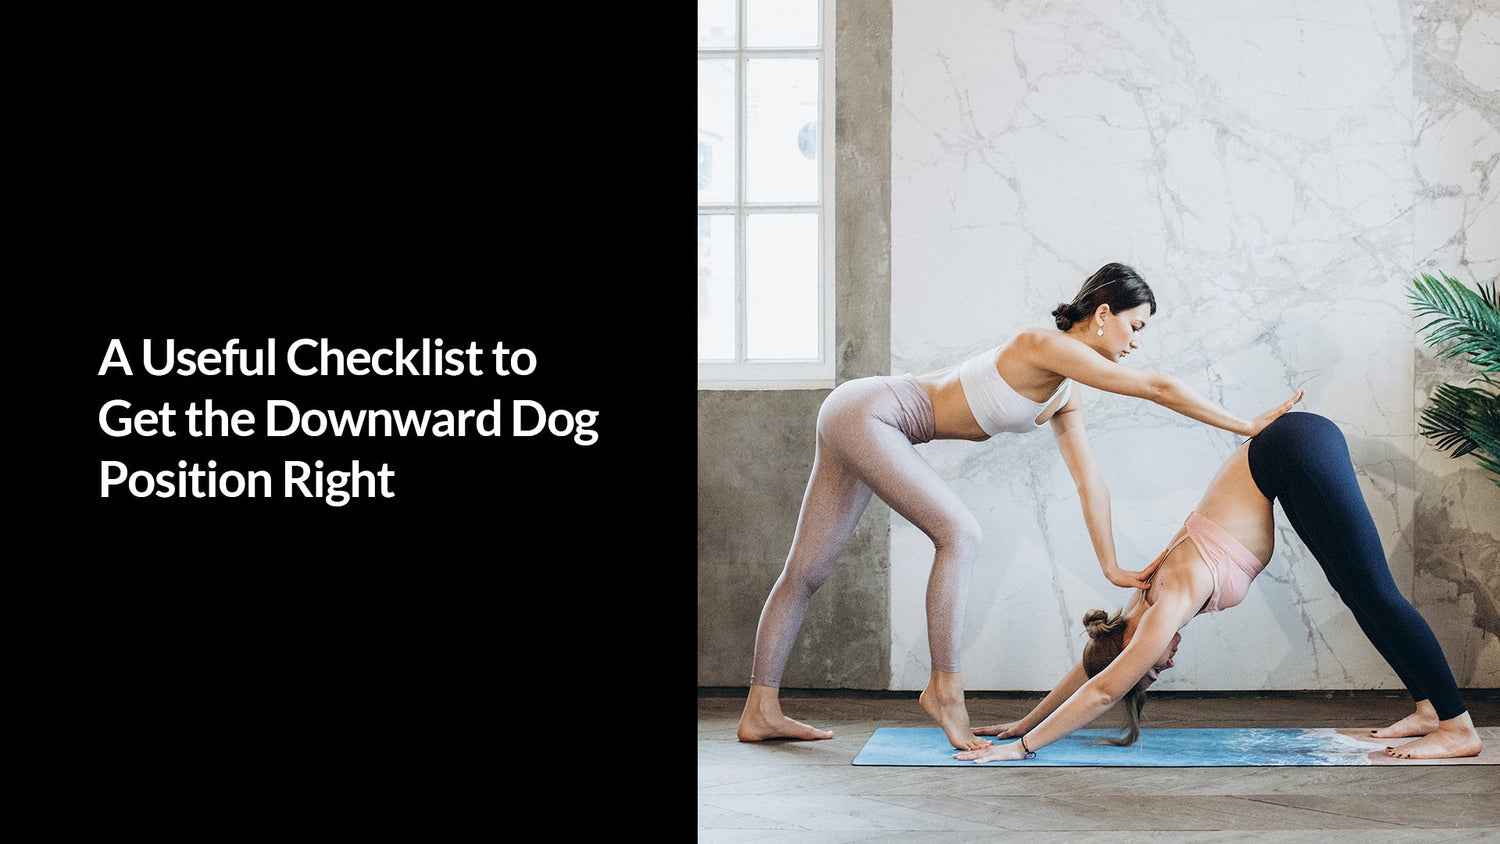 A Useful Checklist to Get the Downward Dog Position Right